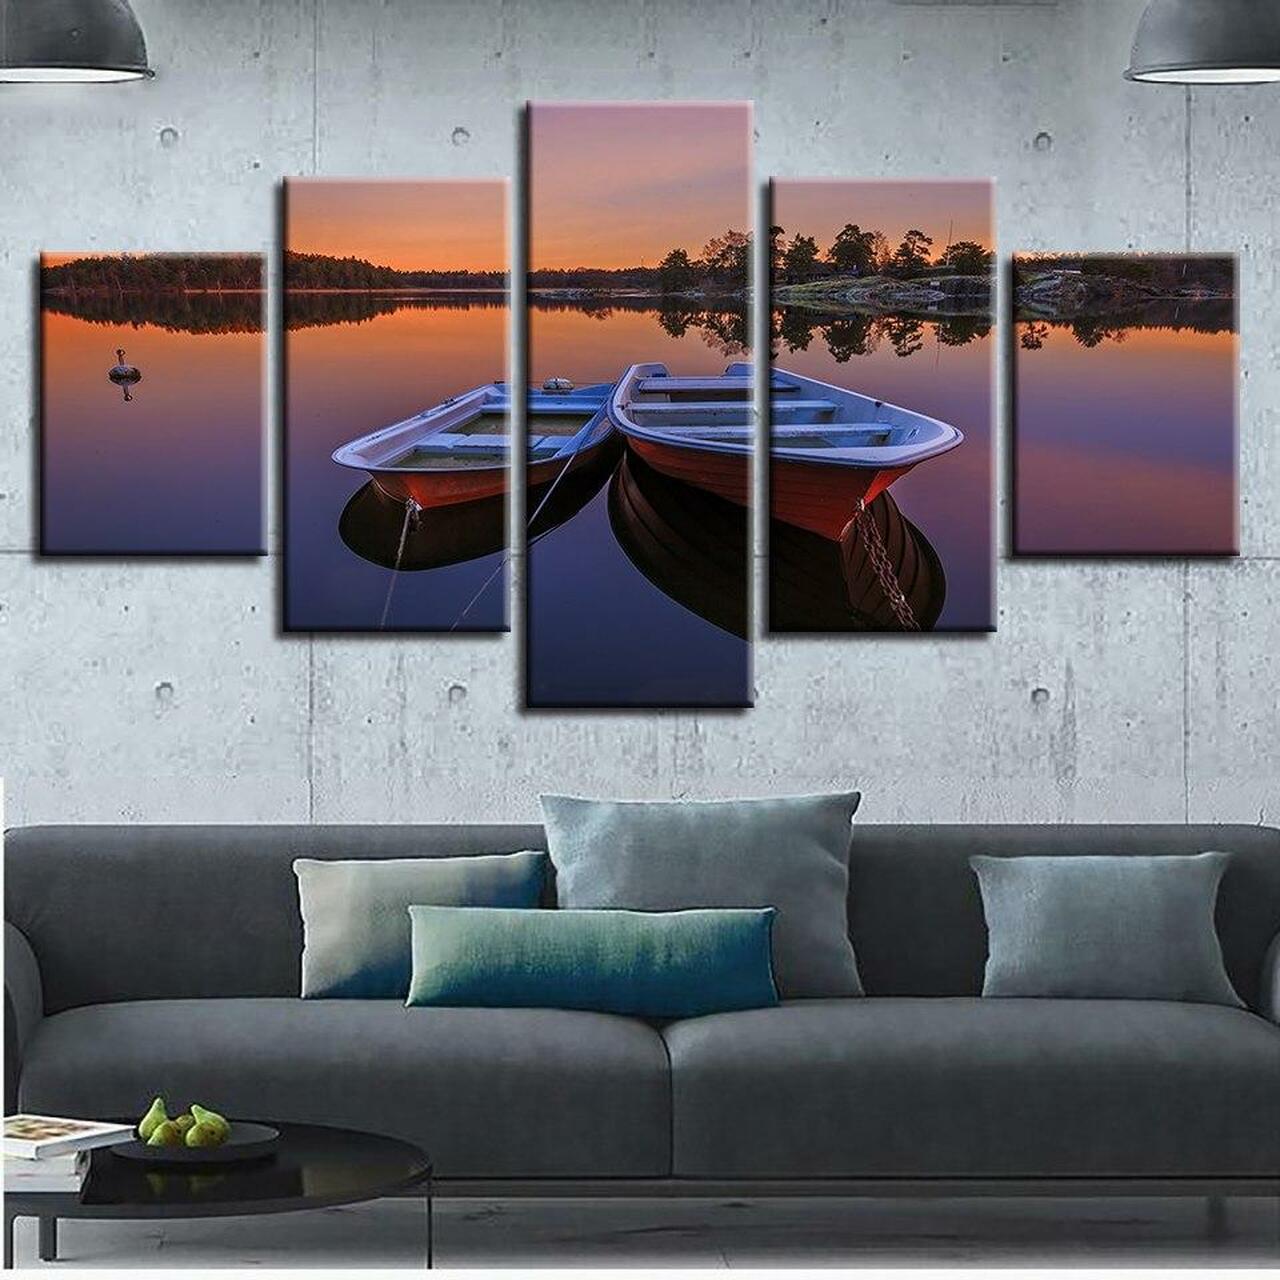 Two Canoes 5 Piece Canvas Art Wall Decor